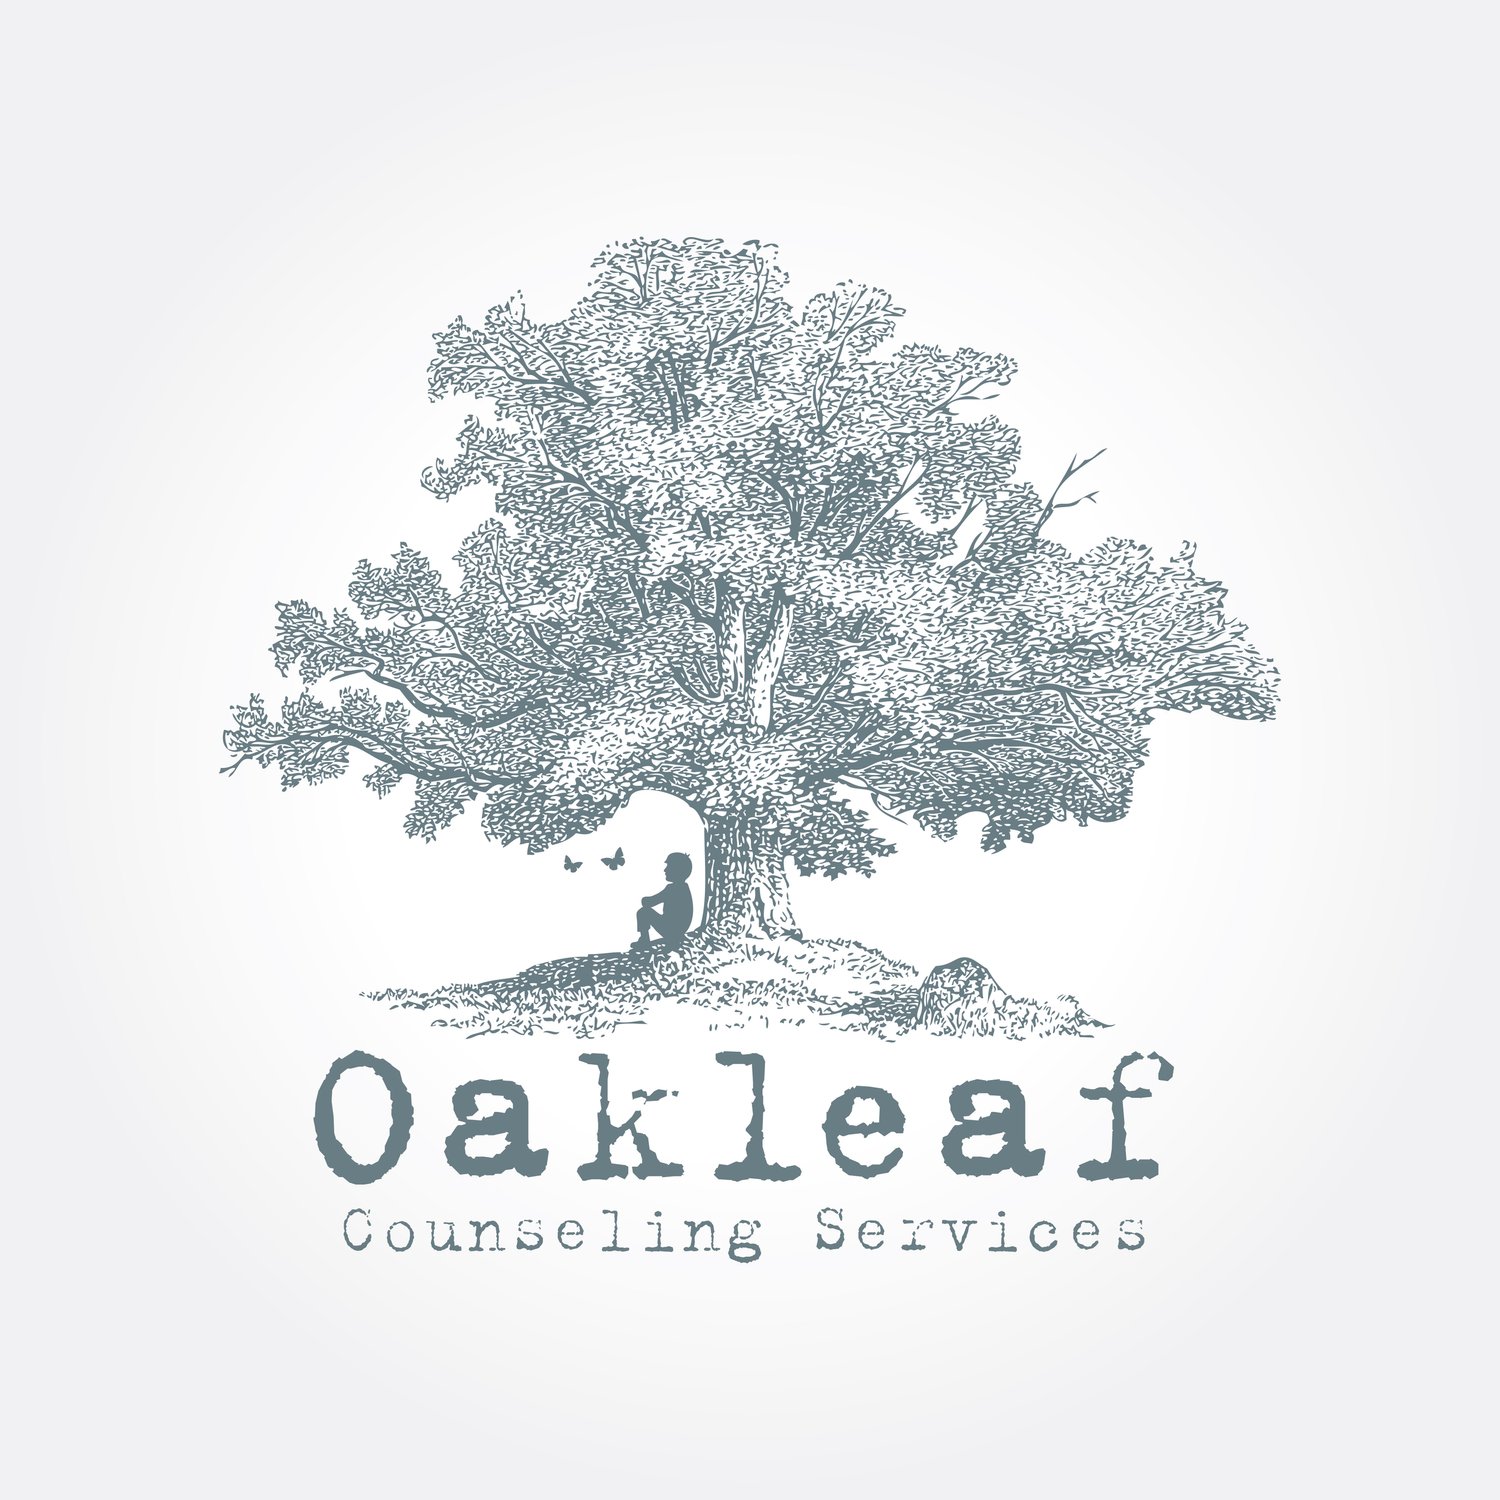 Oakleaf Counseling Services